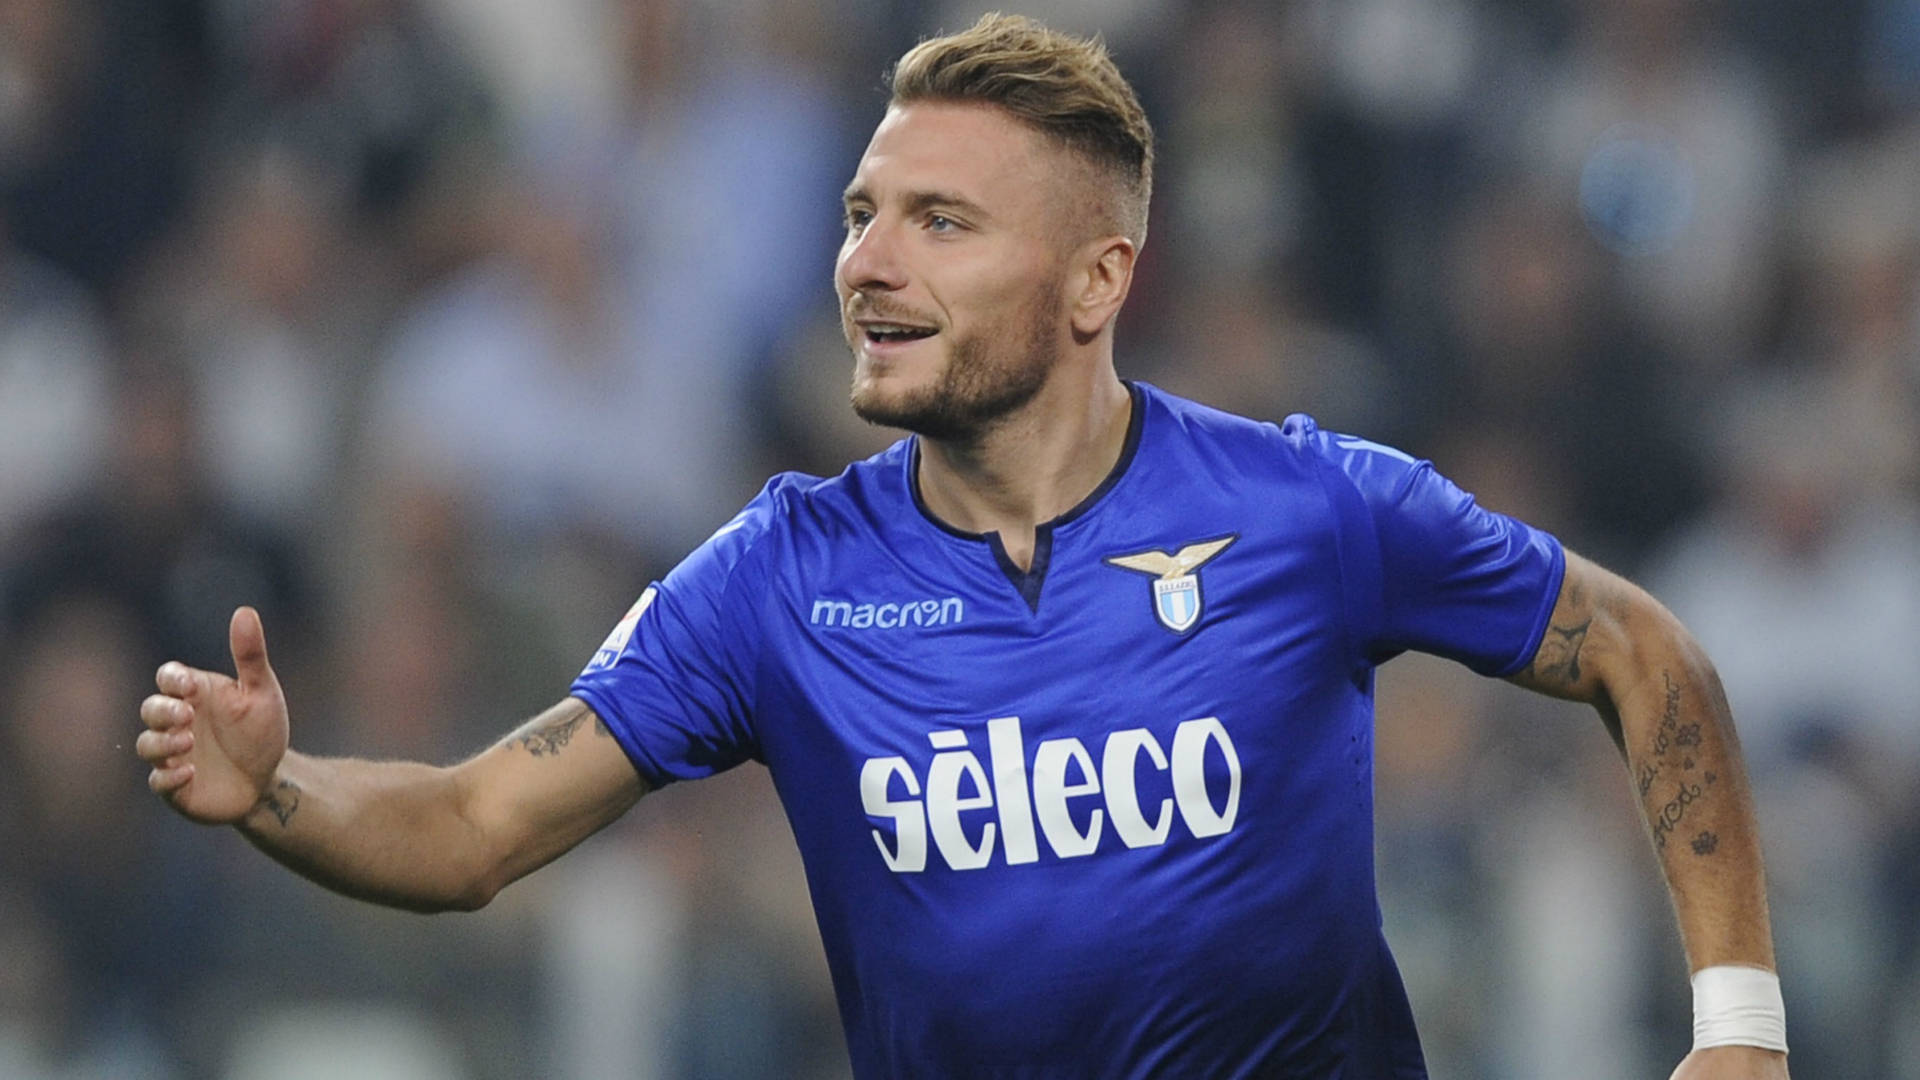 Ciro Immobile In Action On The Soccer Field